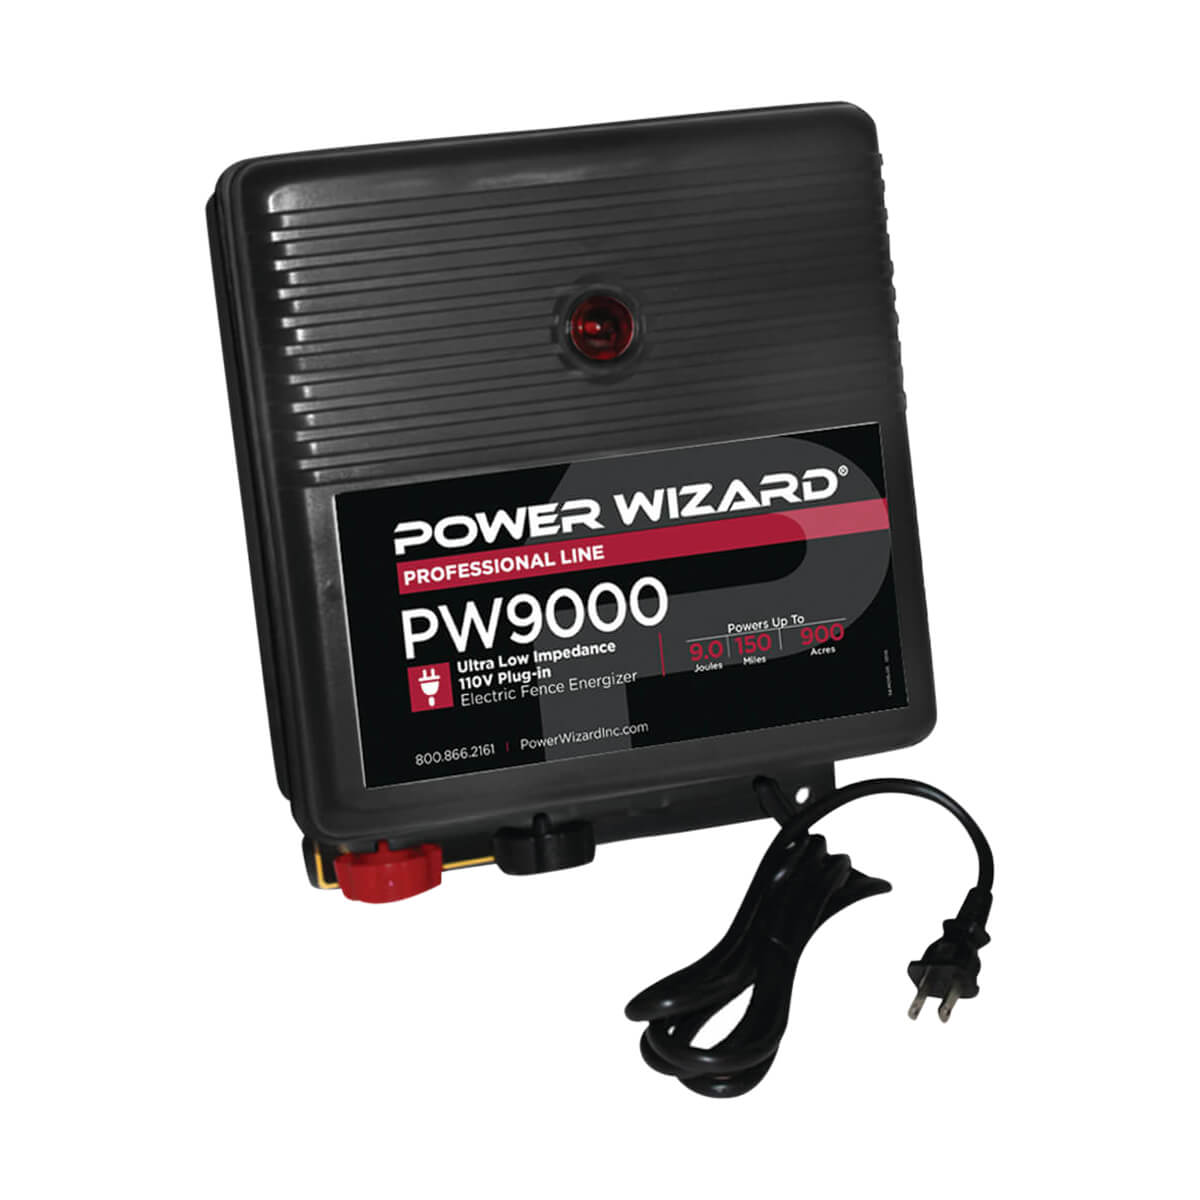 Power Wizard 110V Plug-in Energizer - PW9000